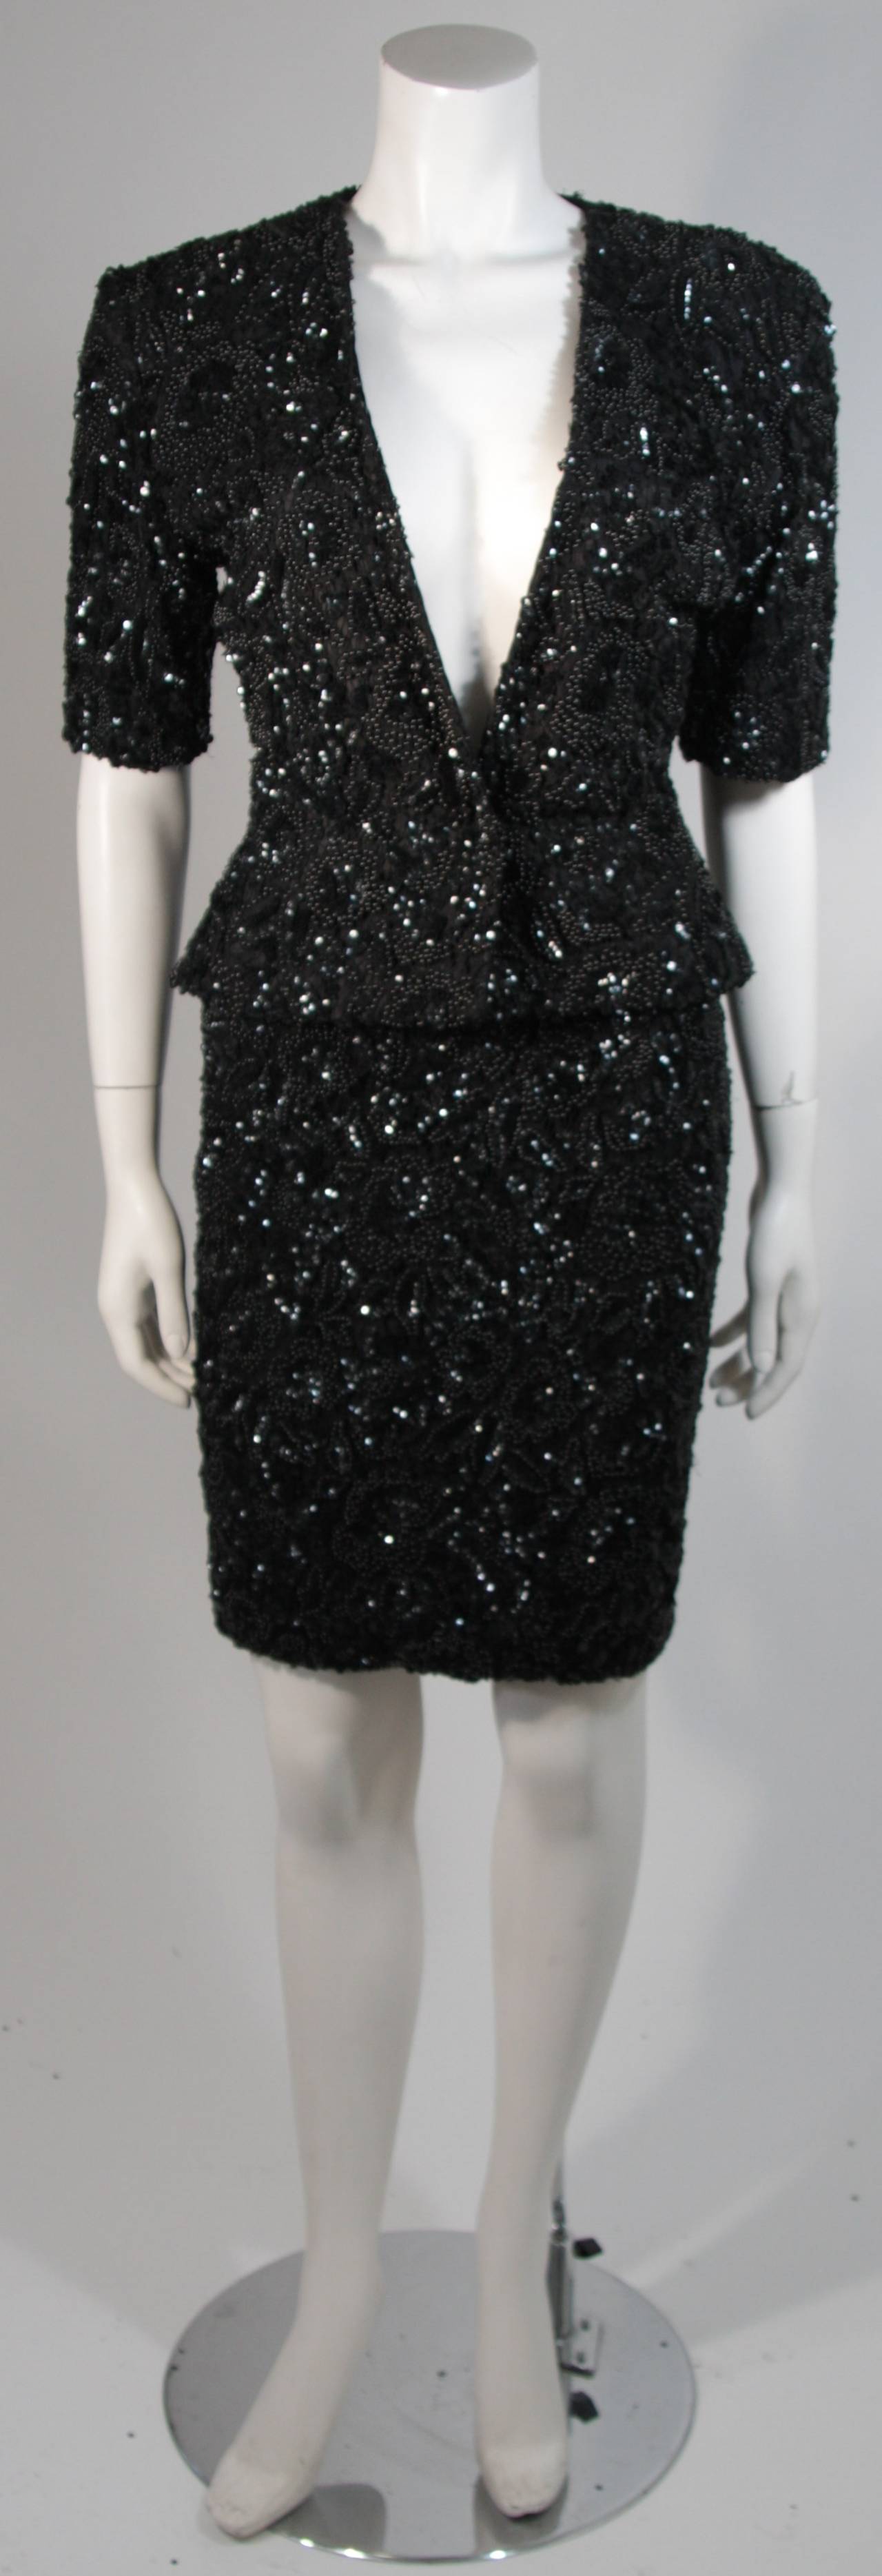 This Vicky Tiel skirt suit is composed of a black sequin and beaded lace. The jacket features a center front snap closure and the skirt has a center back zipper closure for ease of access. In excellent condition. Made in France.

This item is from